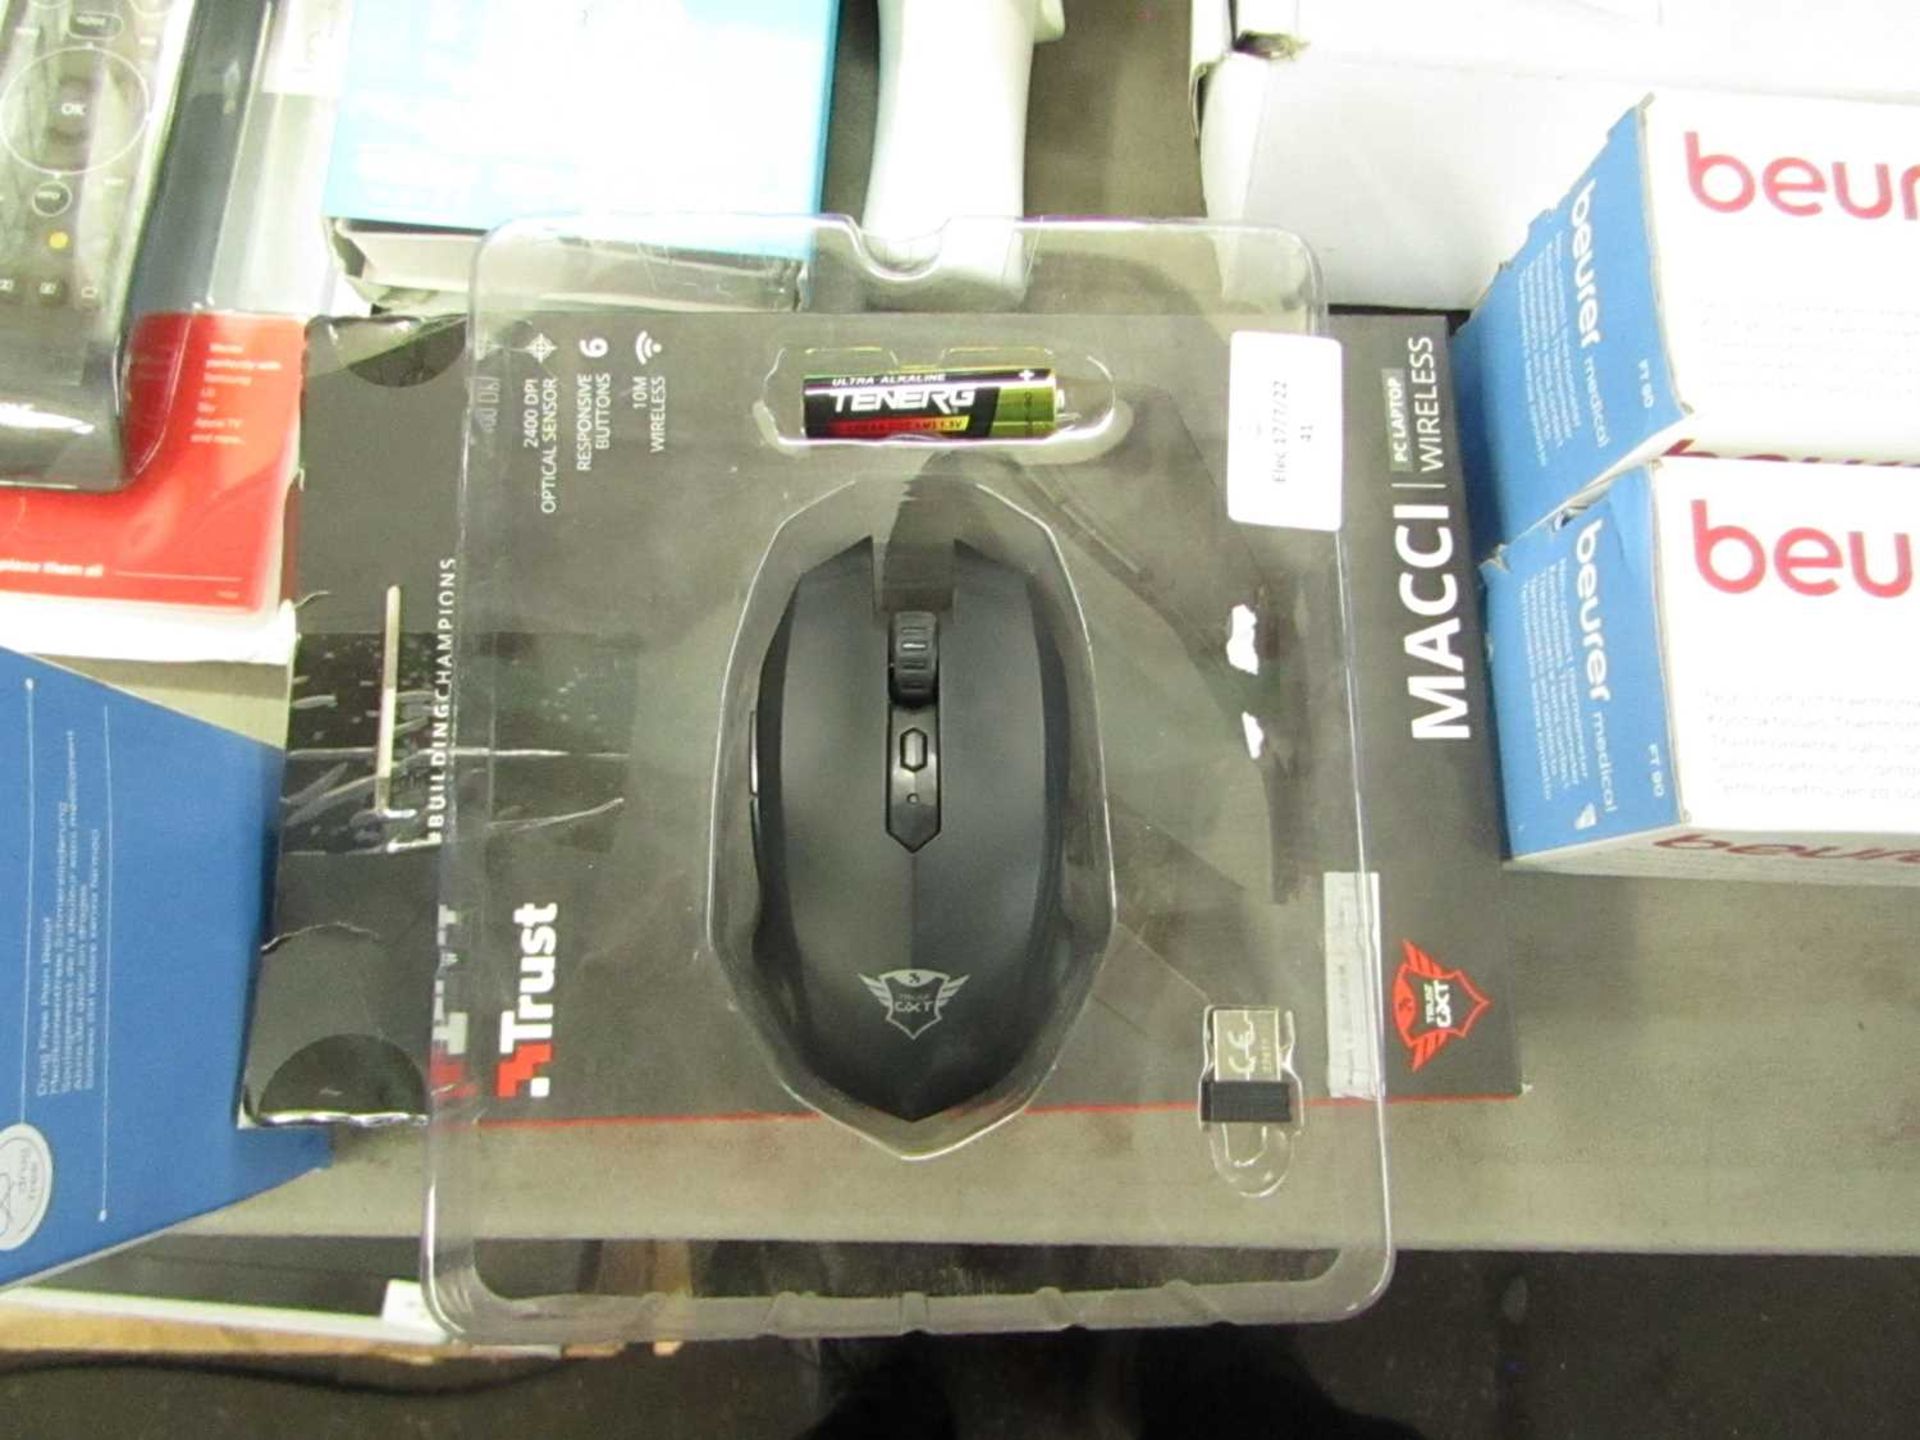 1x Trust Macci Wireless Mouse - Tested Working & Boxed